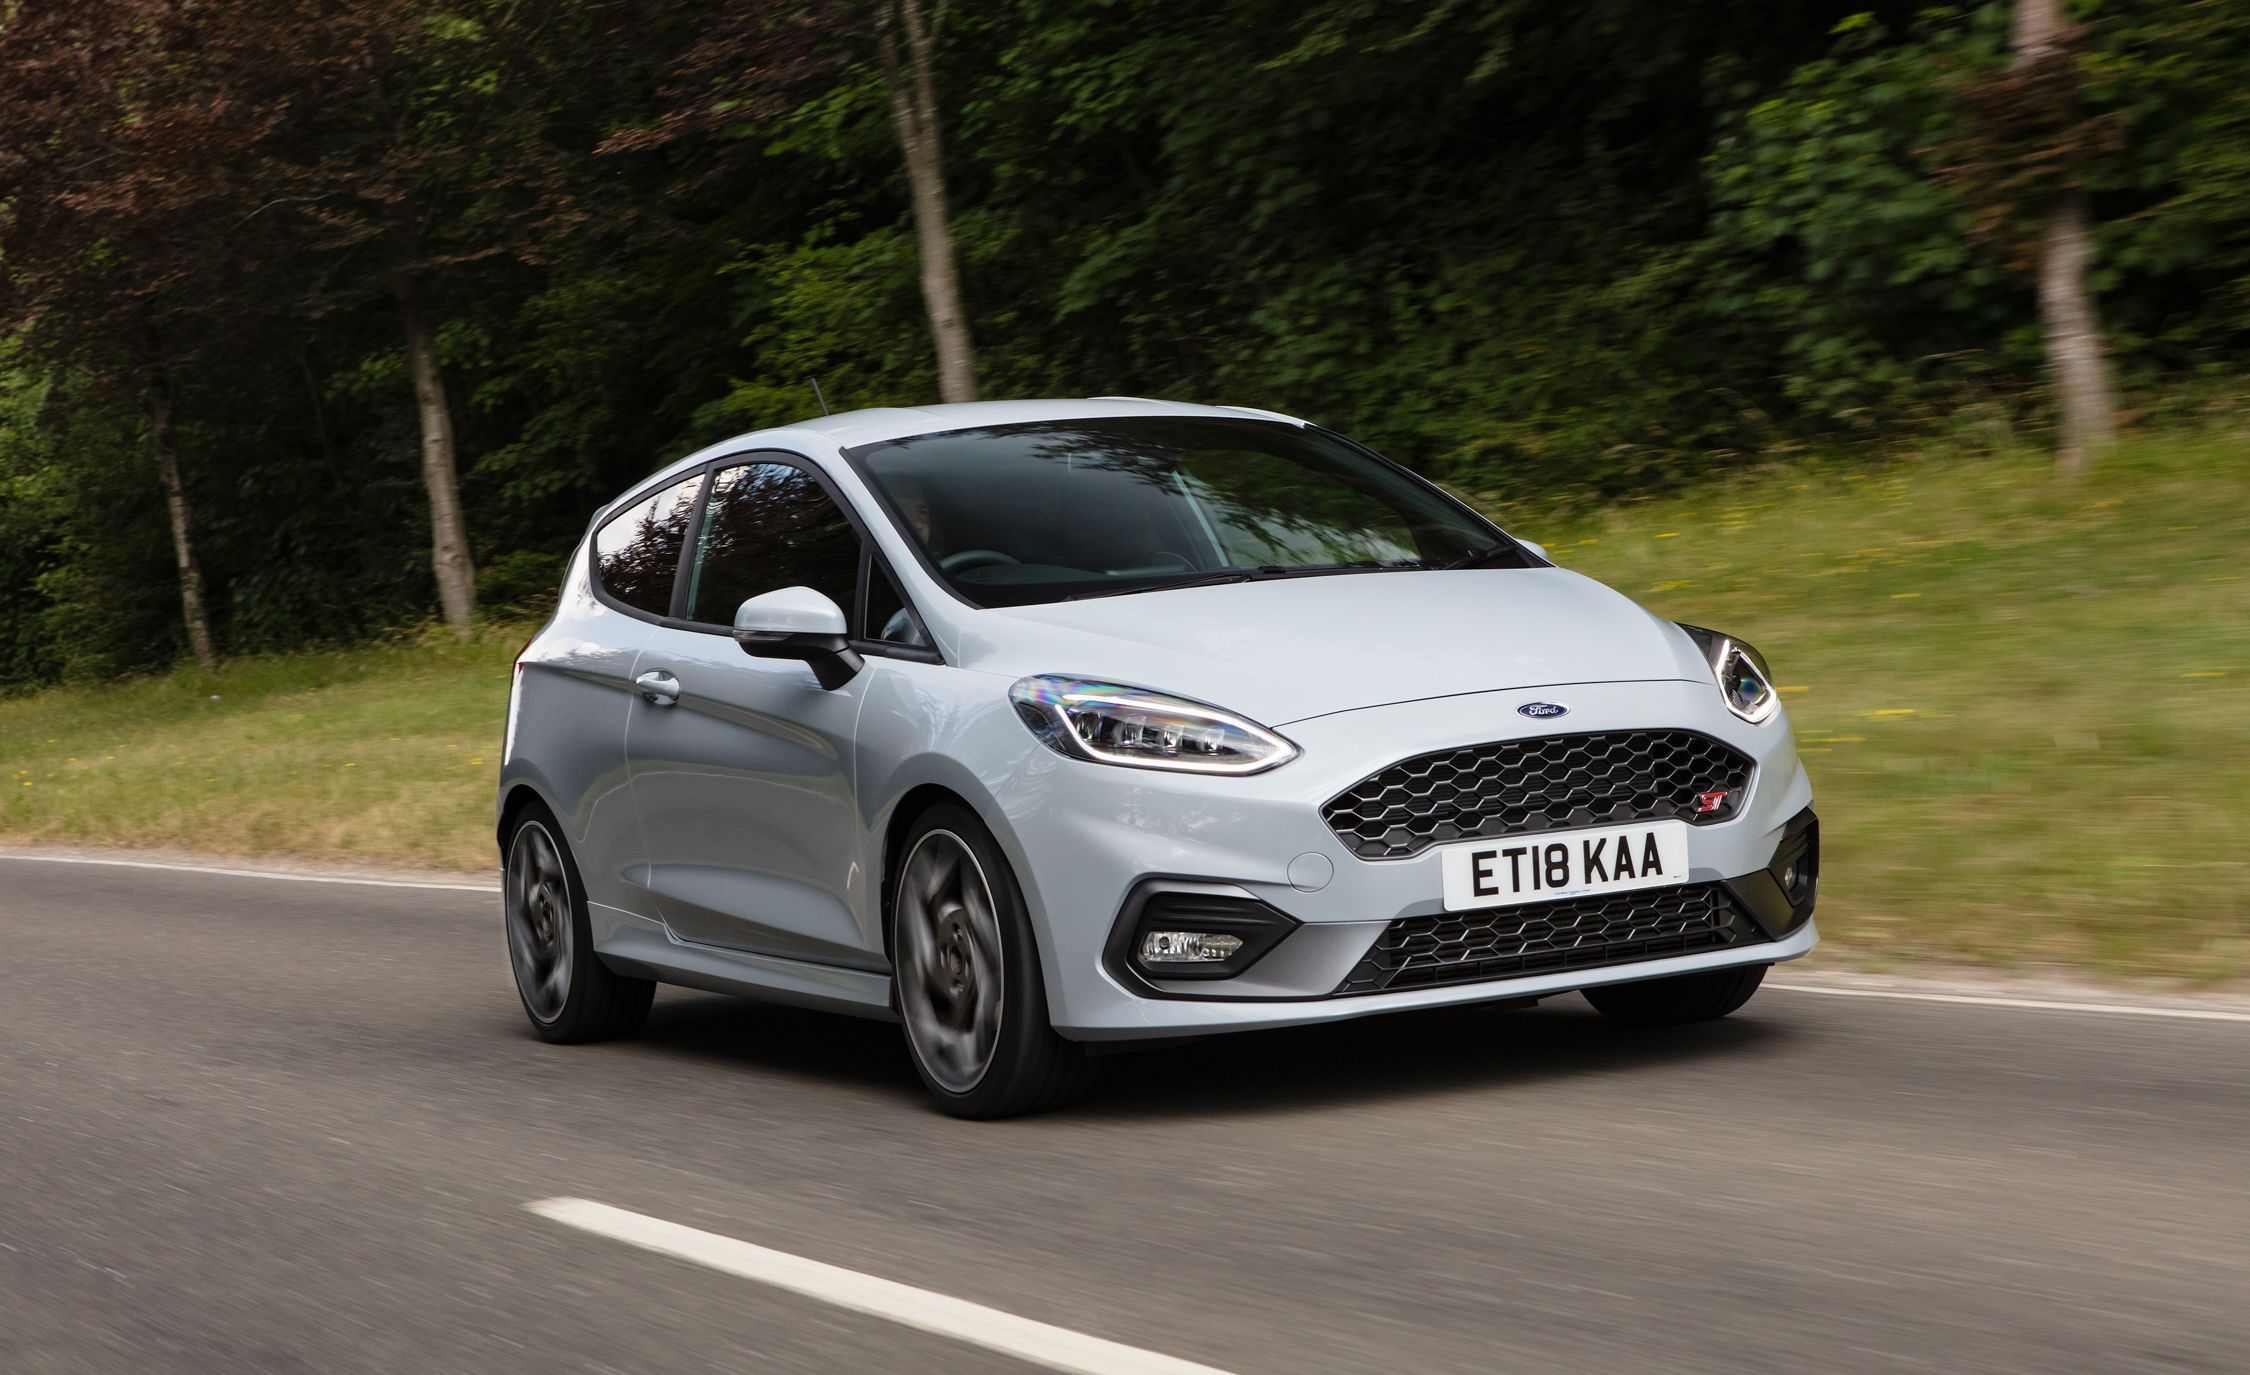 2018 Ford Fiesta St_9 (Gallery 42 of 51)